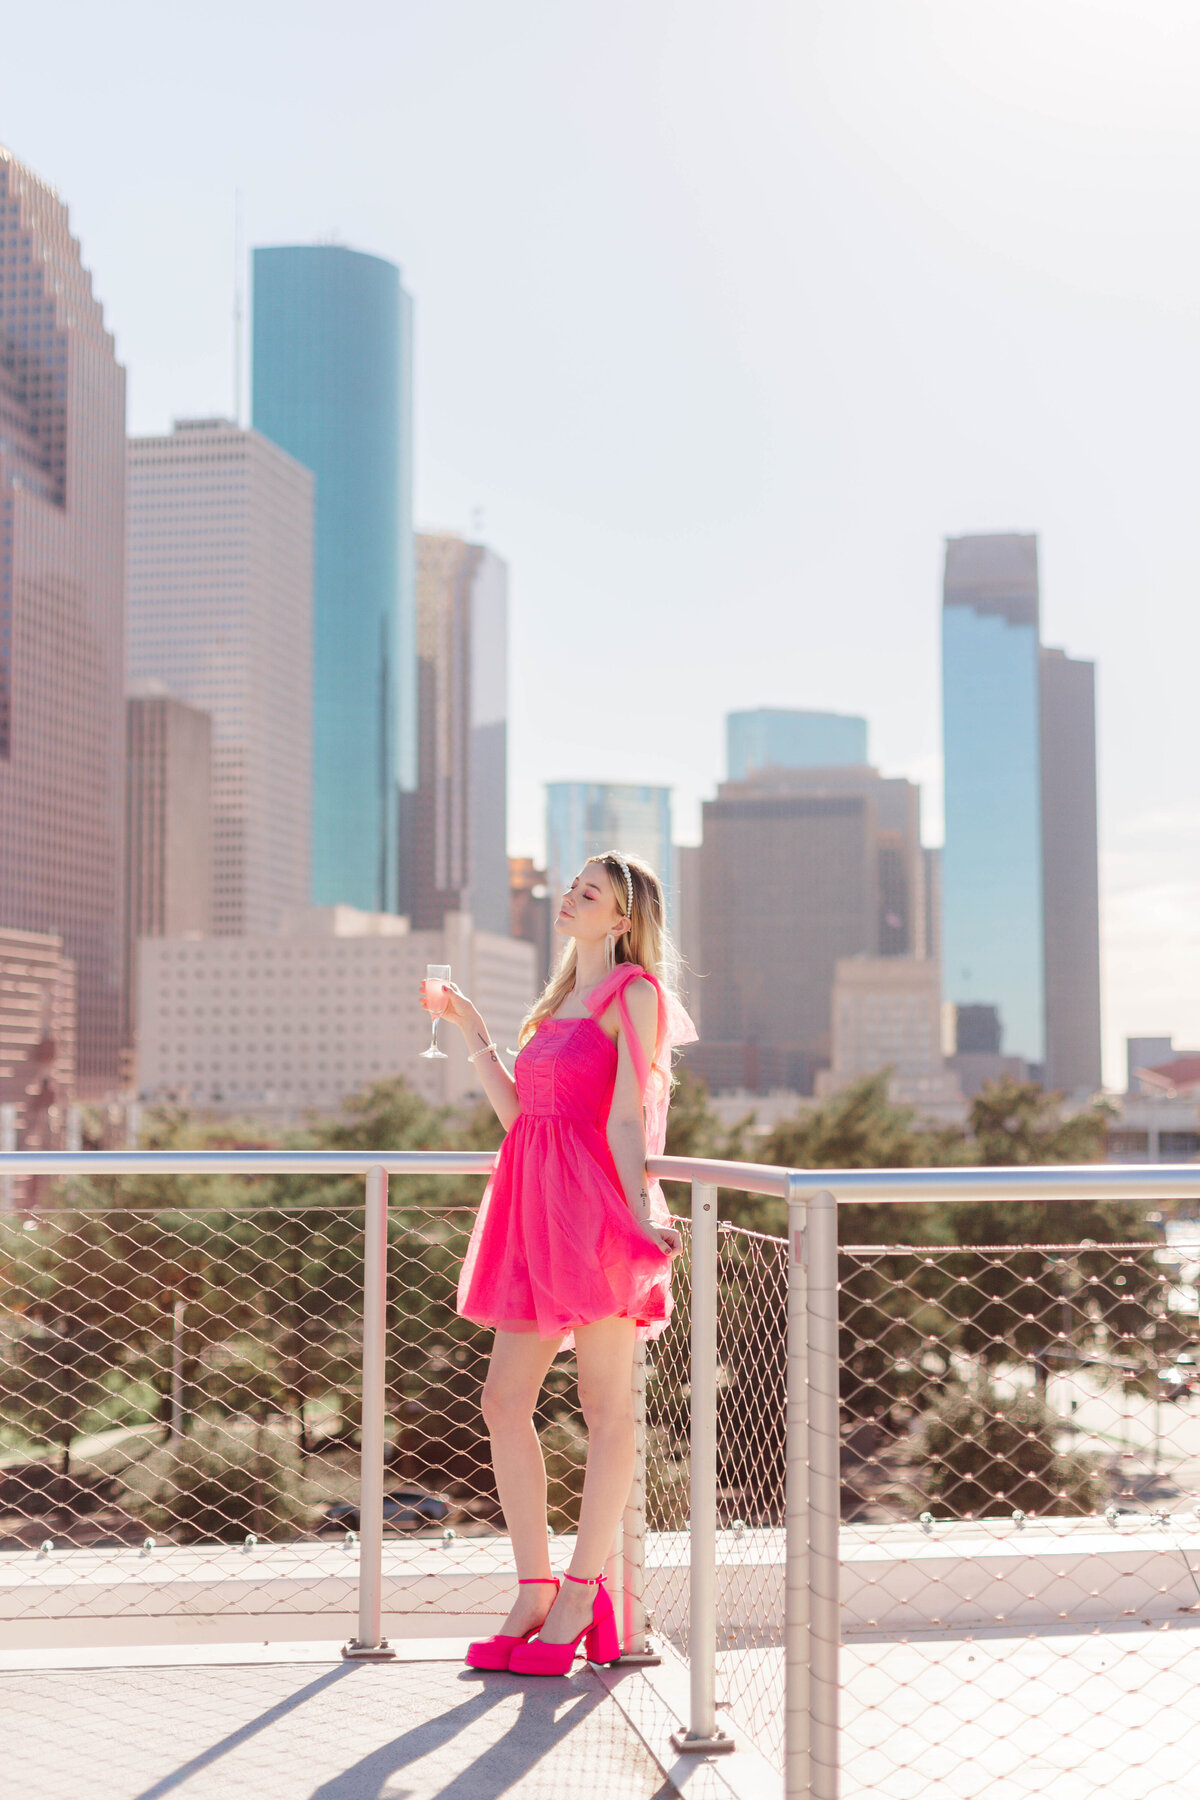 Barbie model gives a champagne toast on a rooftop overlooking downtown houston skyline